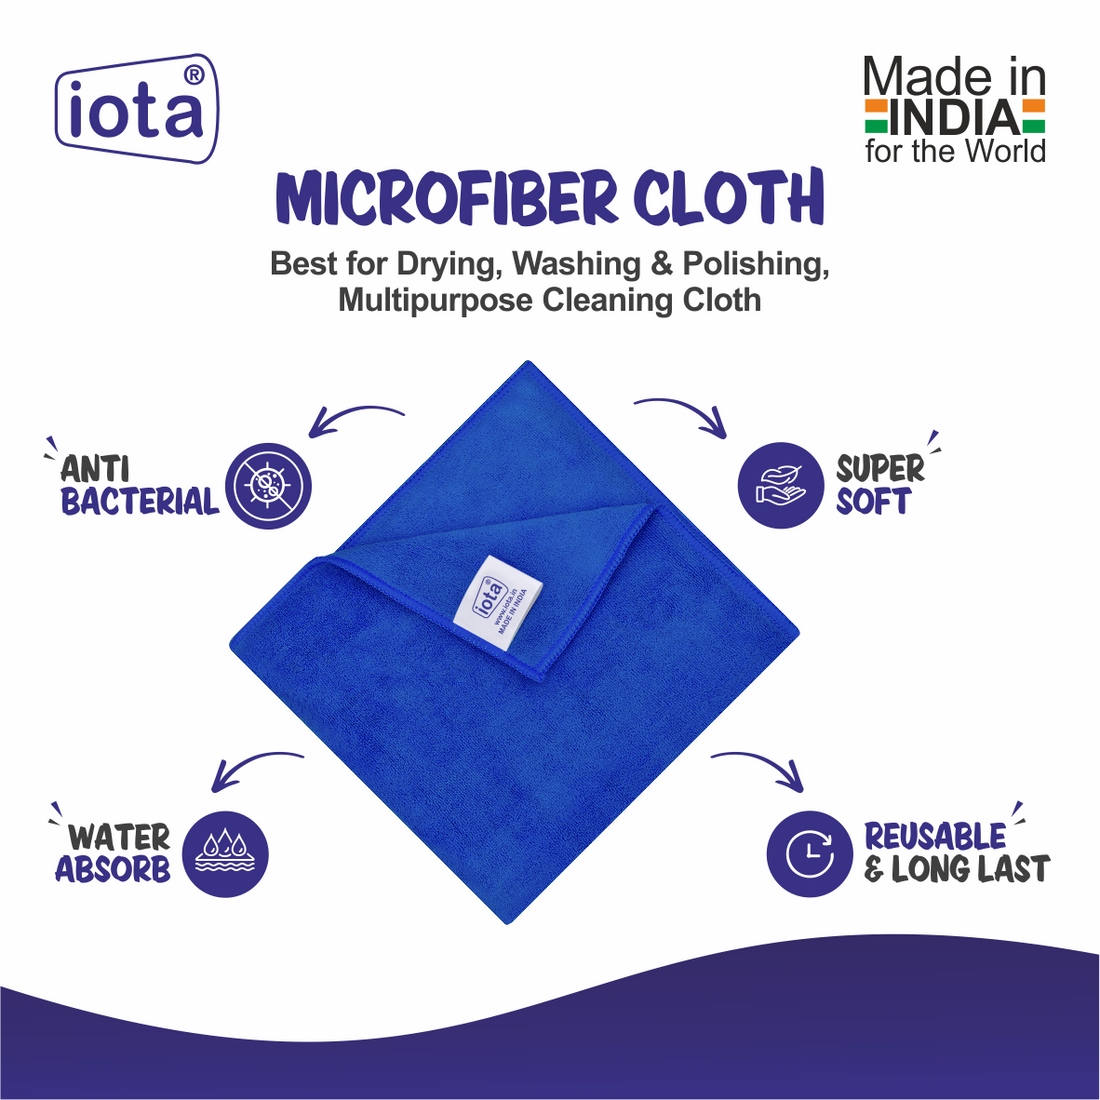 iota Microfiber Automotive Cleaning Cloth Highly Absorbent 60x40cms 450 GSM